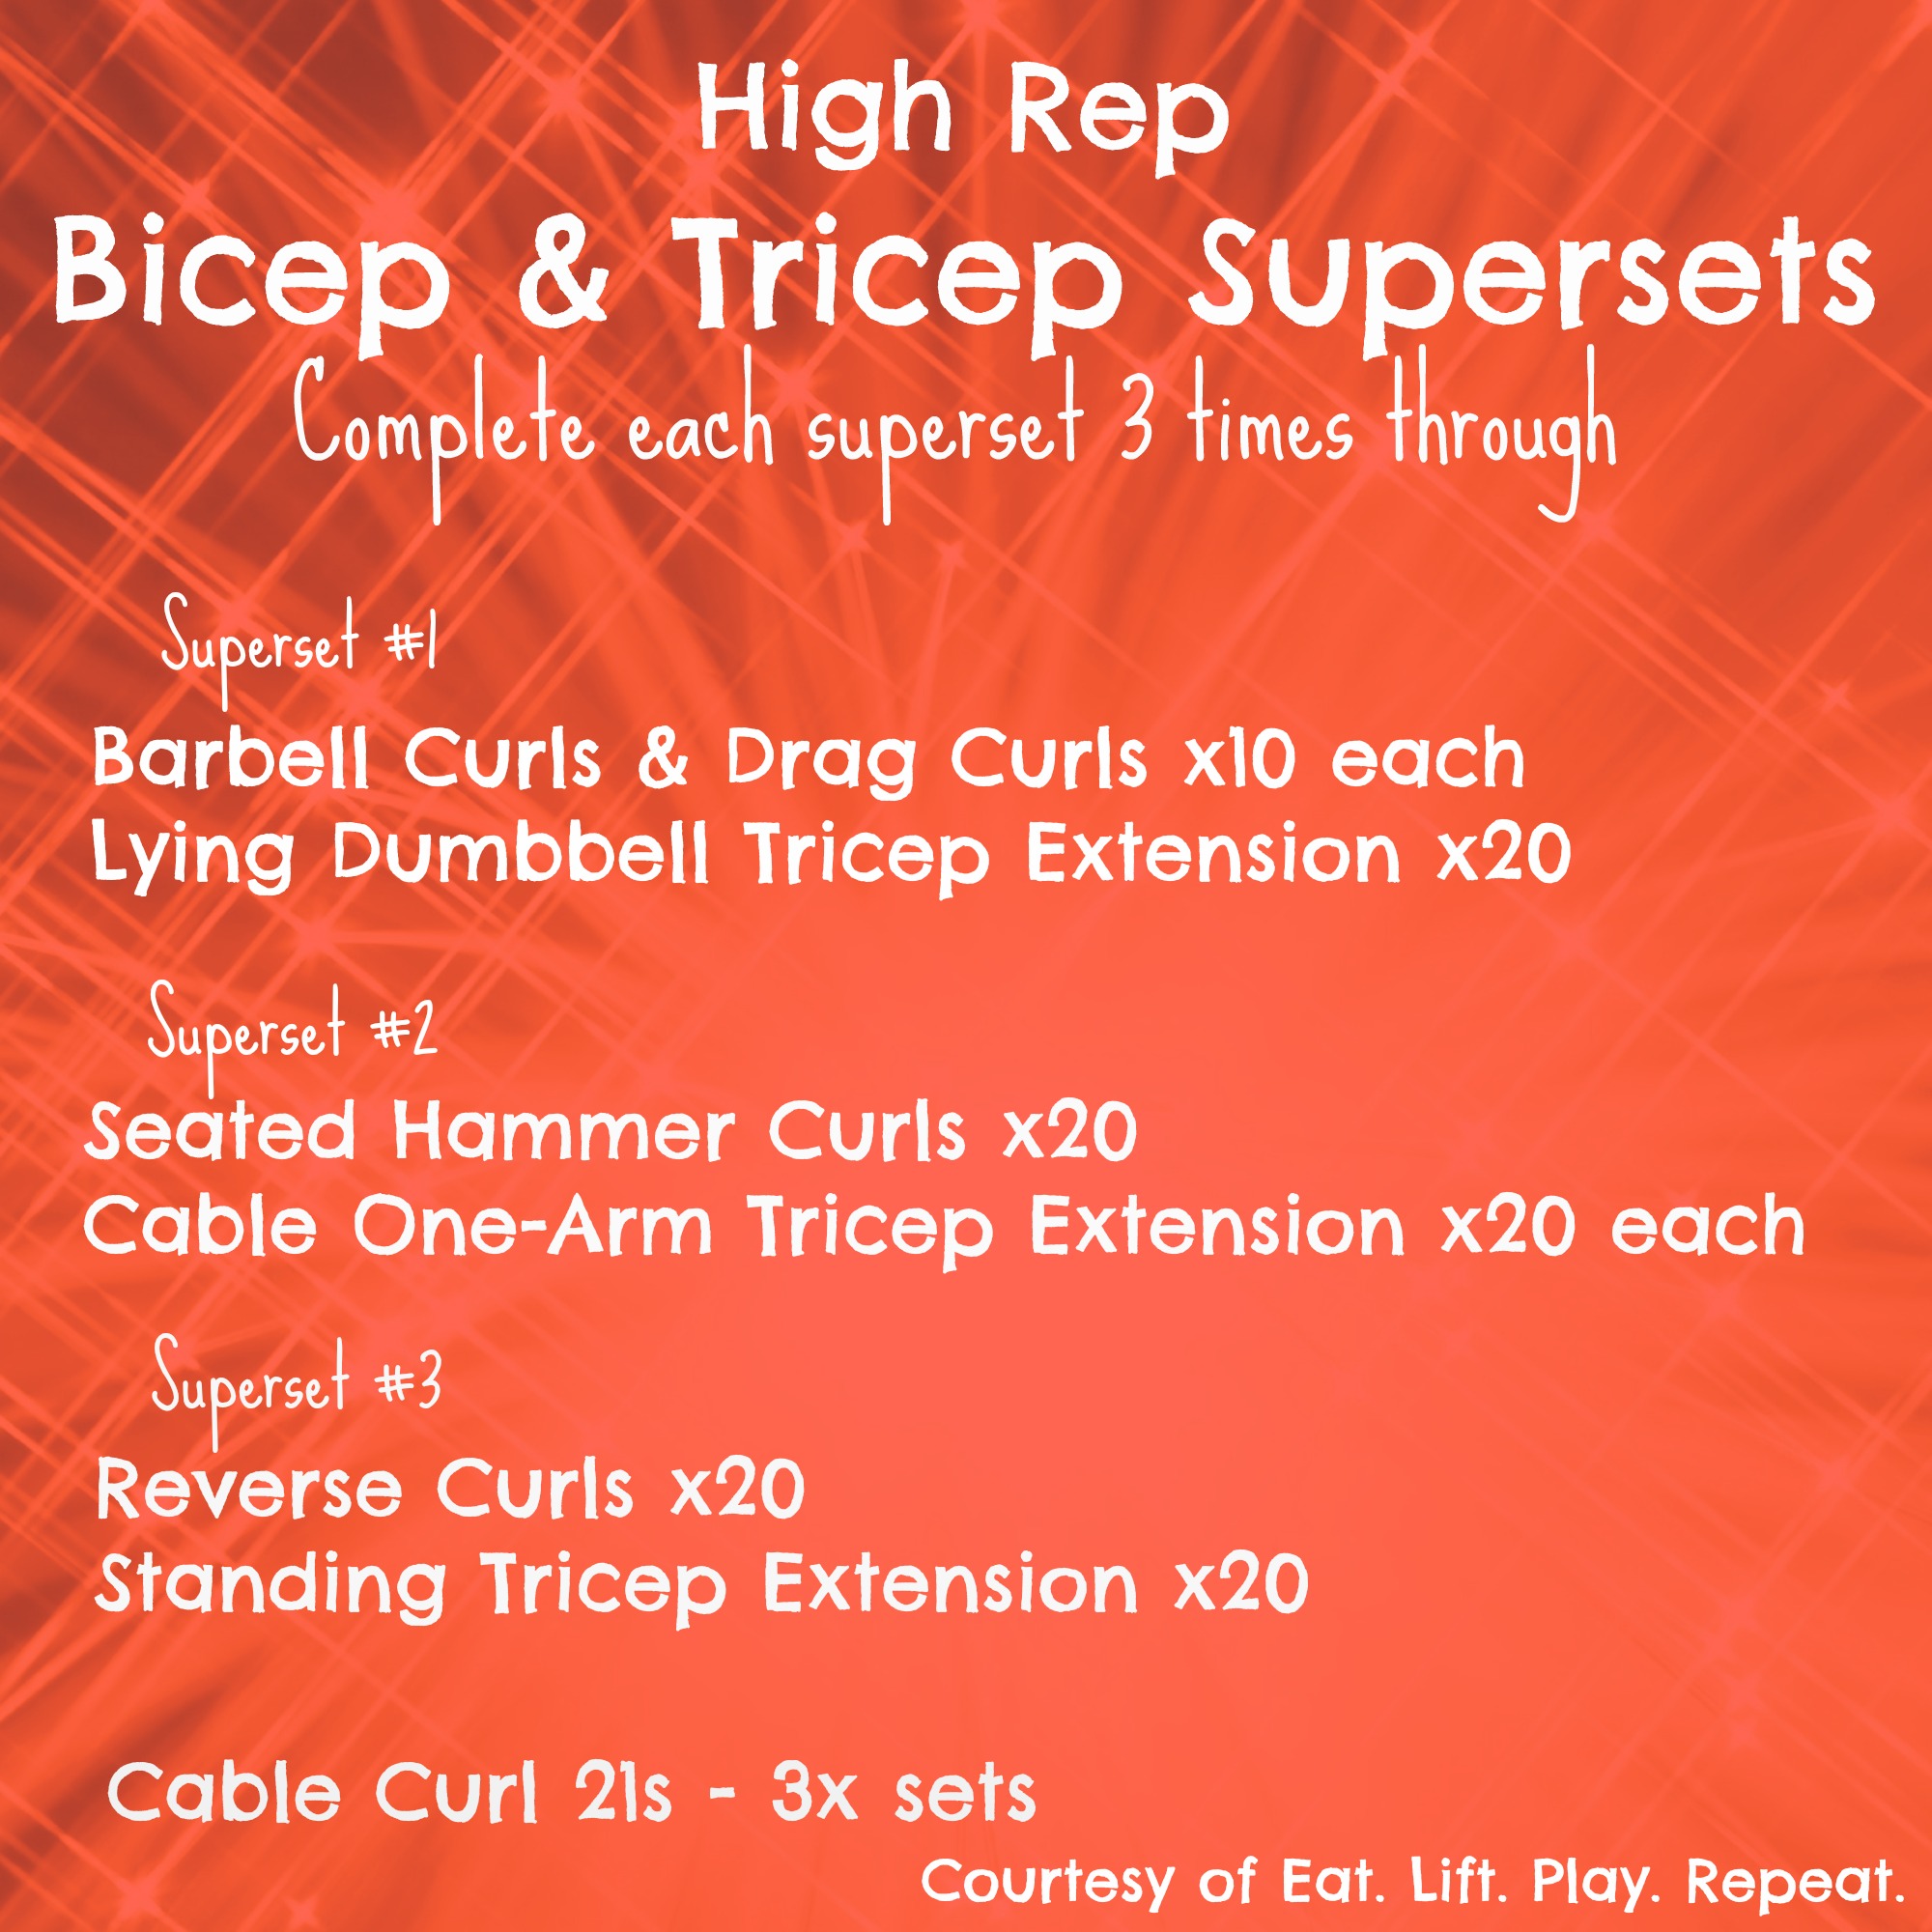 High Rep Bicep & Tricep Supersets - Eat. Lift. Play. Repeat.